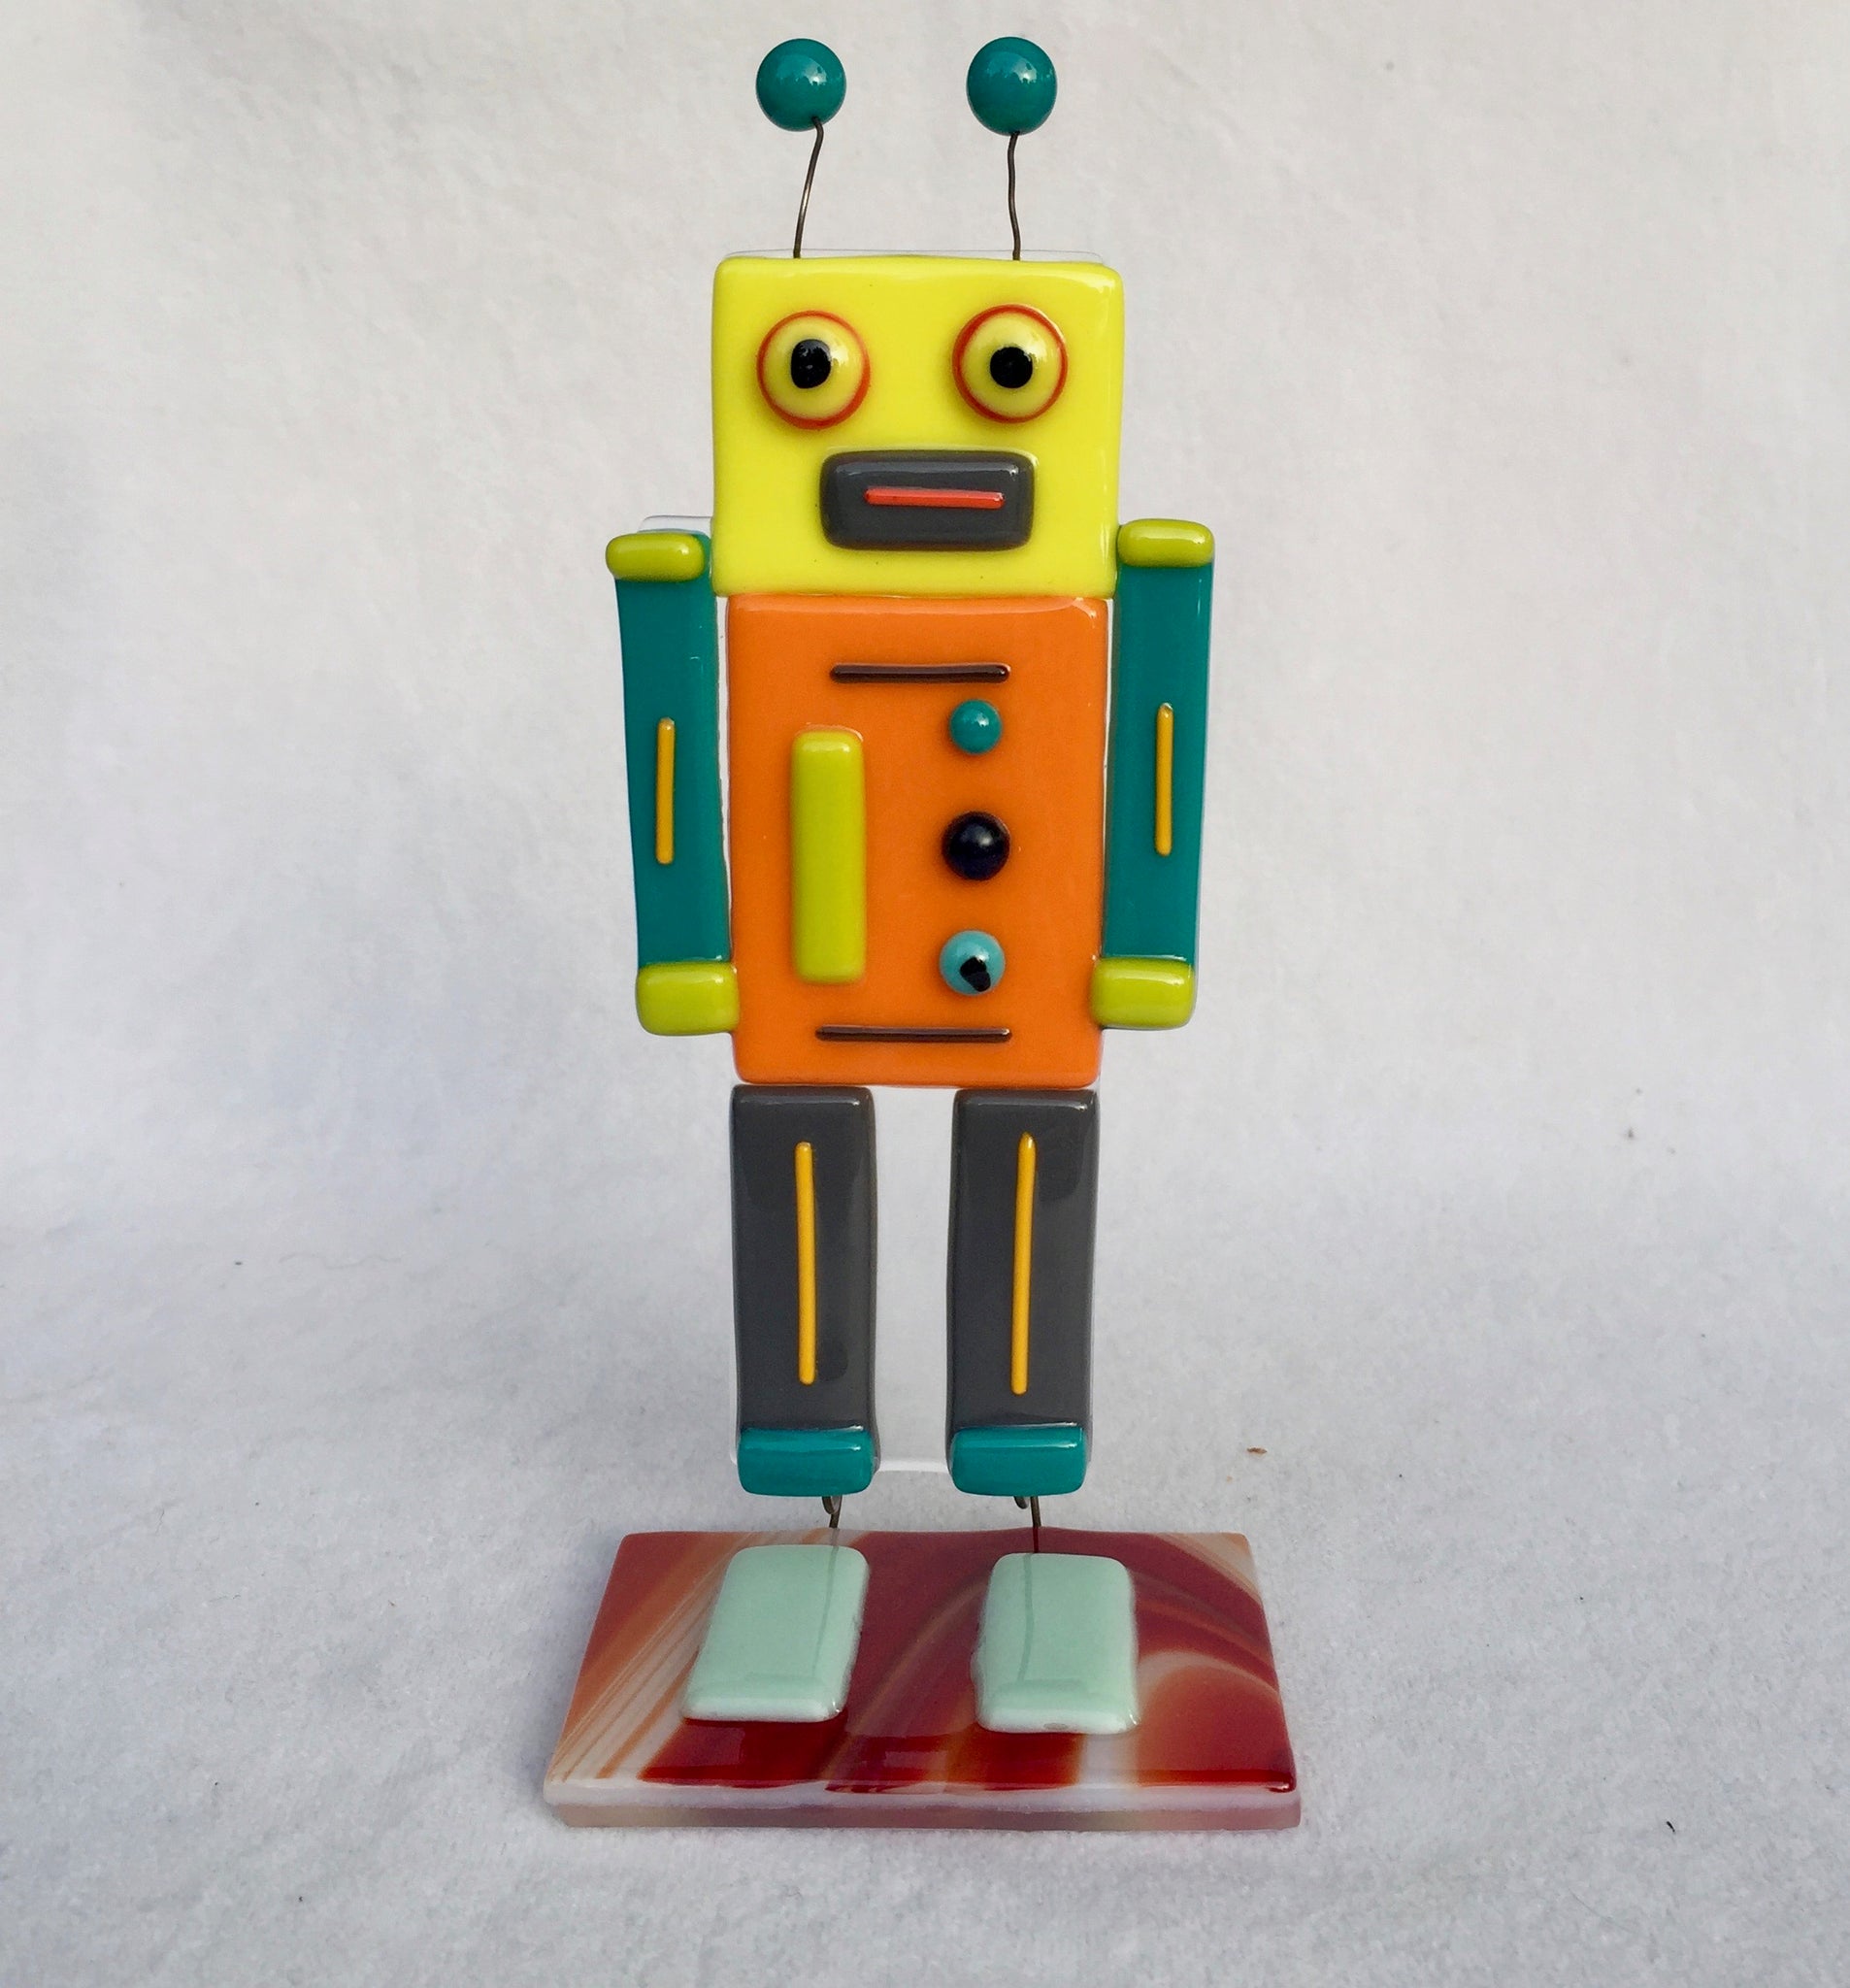 Fused Glass Robot Sculpture